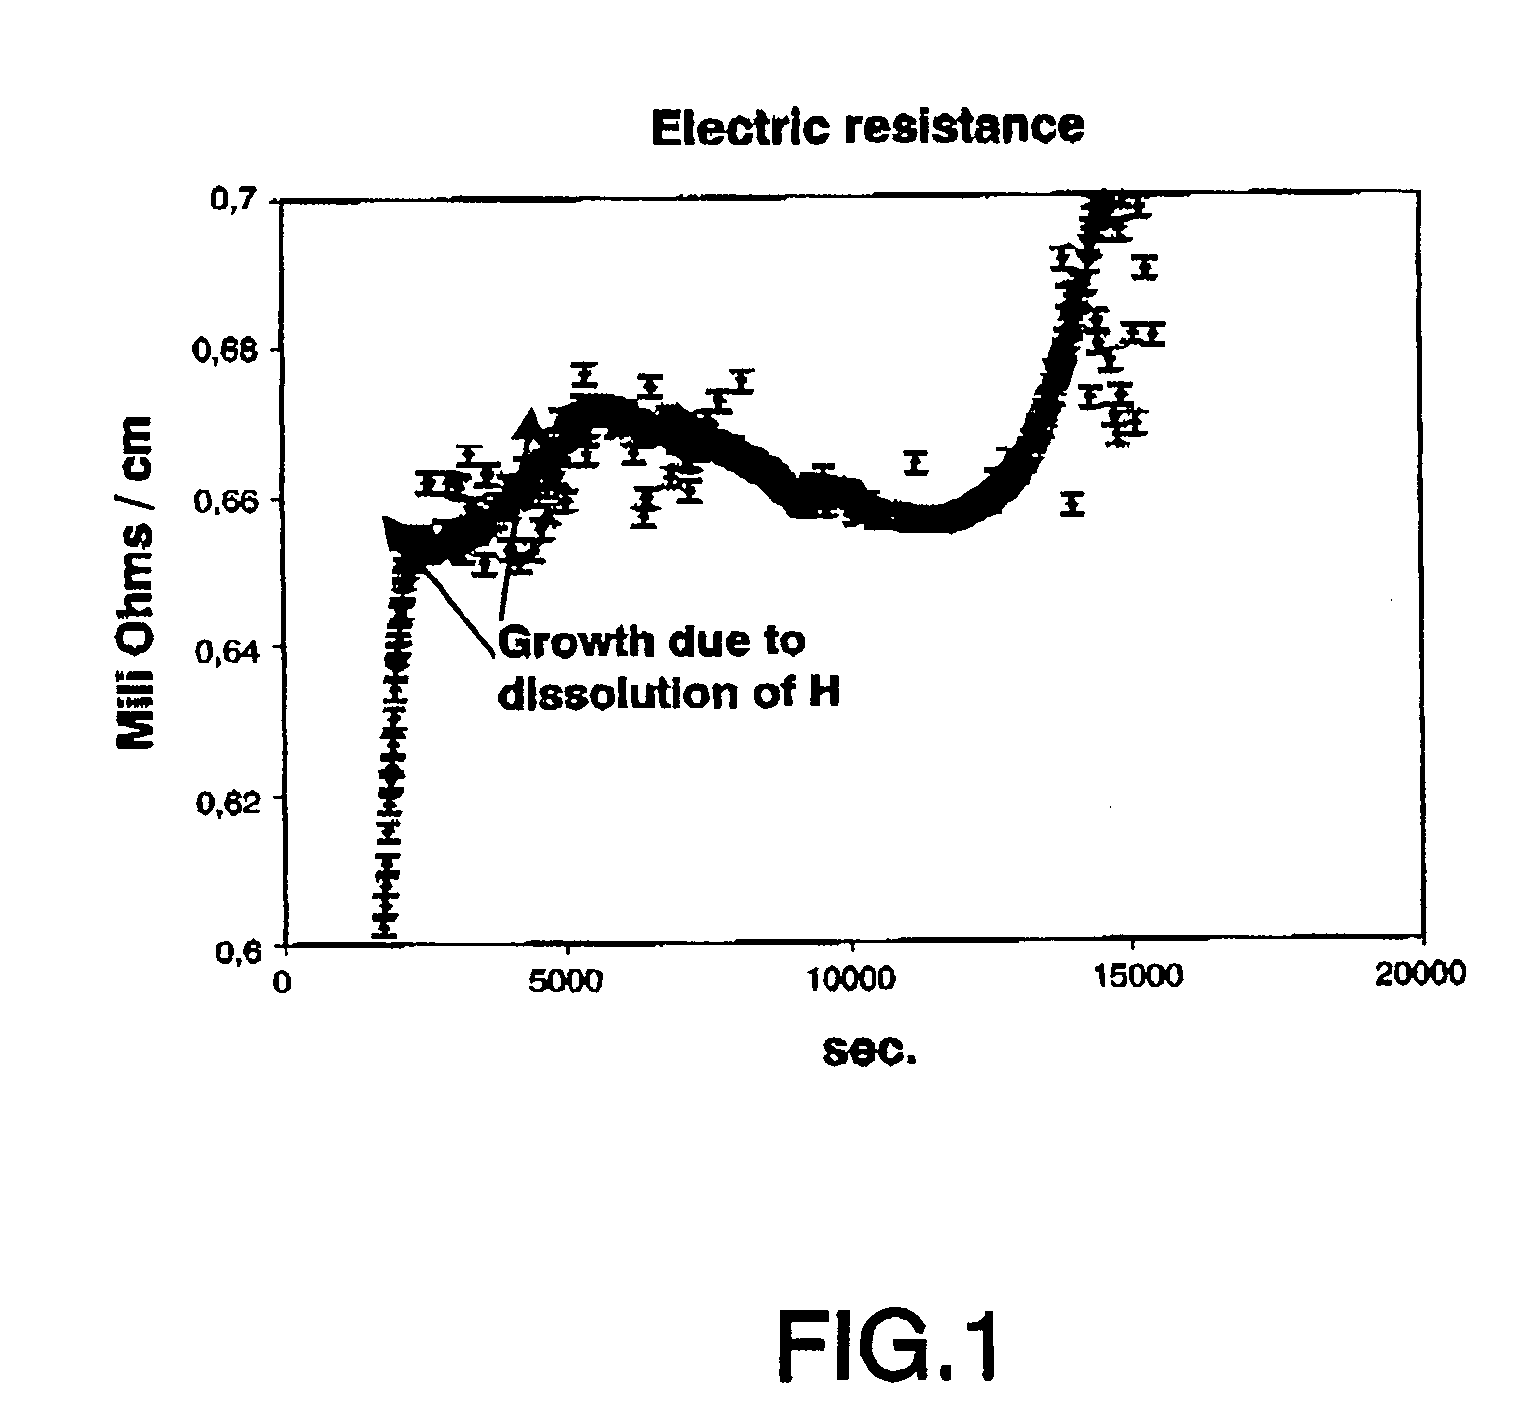 Method and device for measuring the power dissipated by a hydridation reaction in tubes and tubular claddings and the corresponding variation in electric resistance